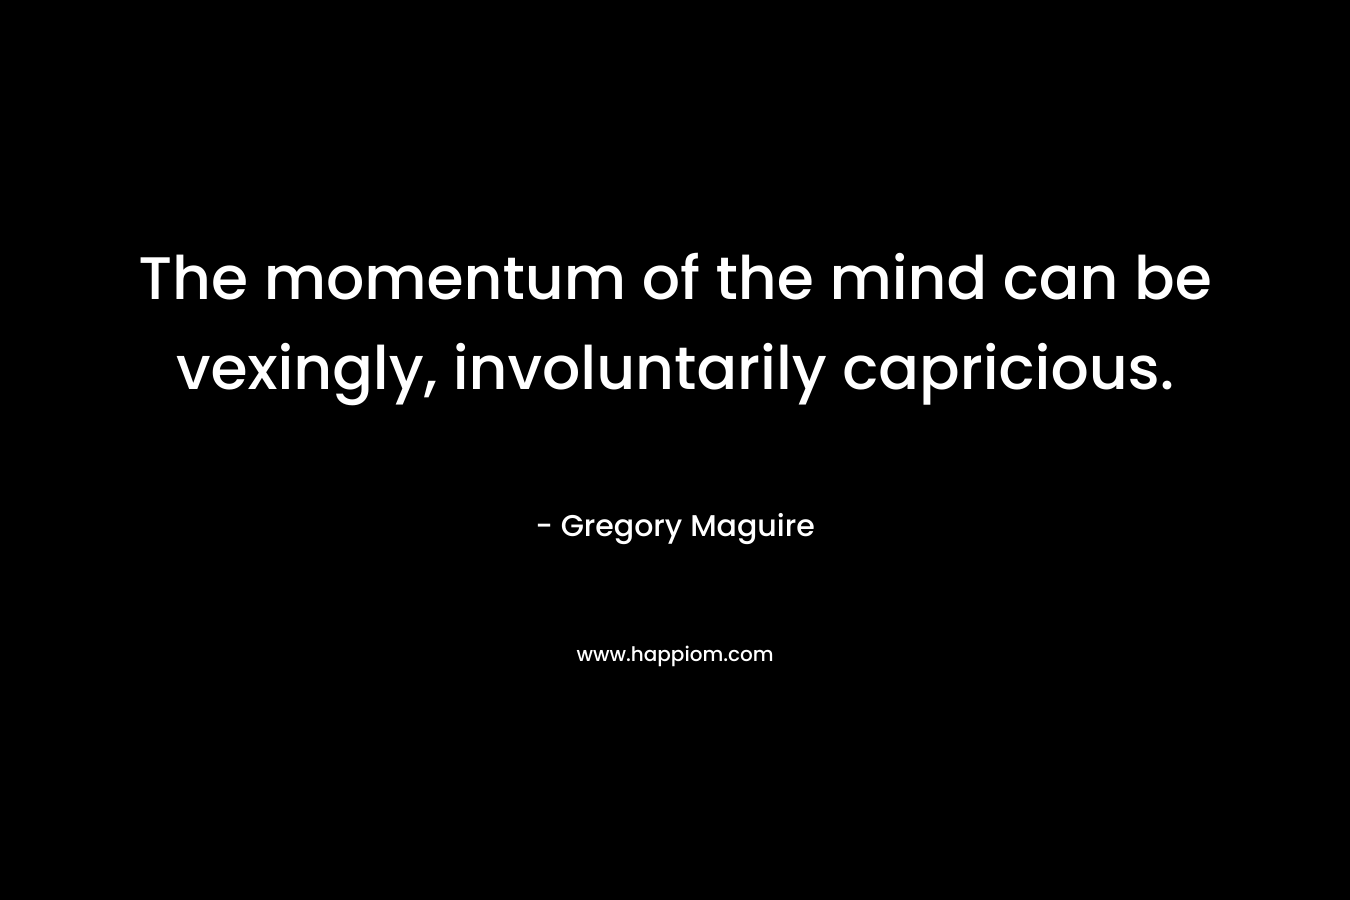 The momentum of the mind can be vexingly, involuntarily capricious.